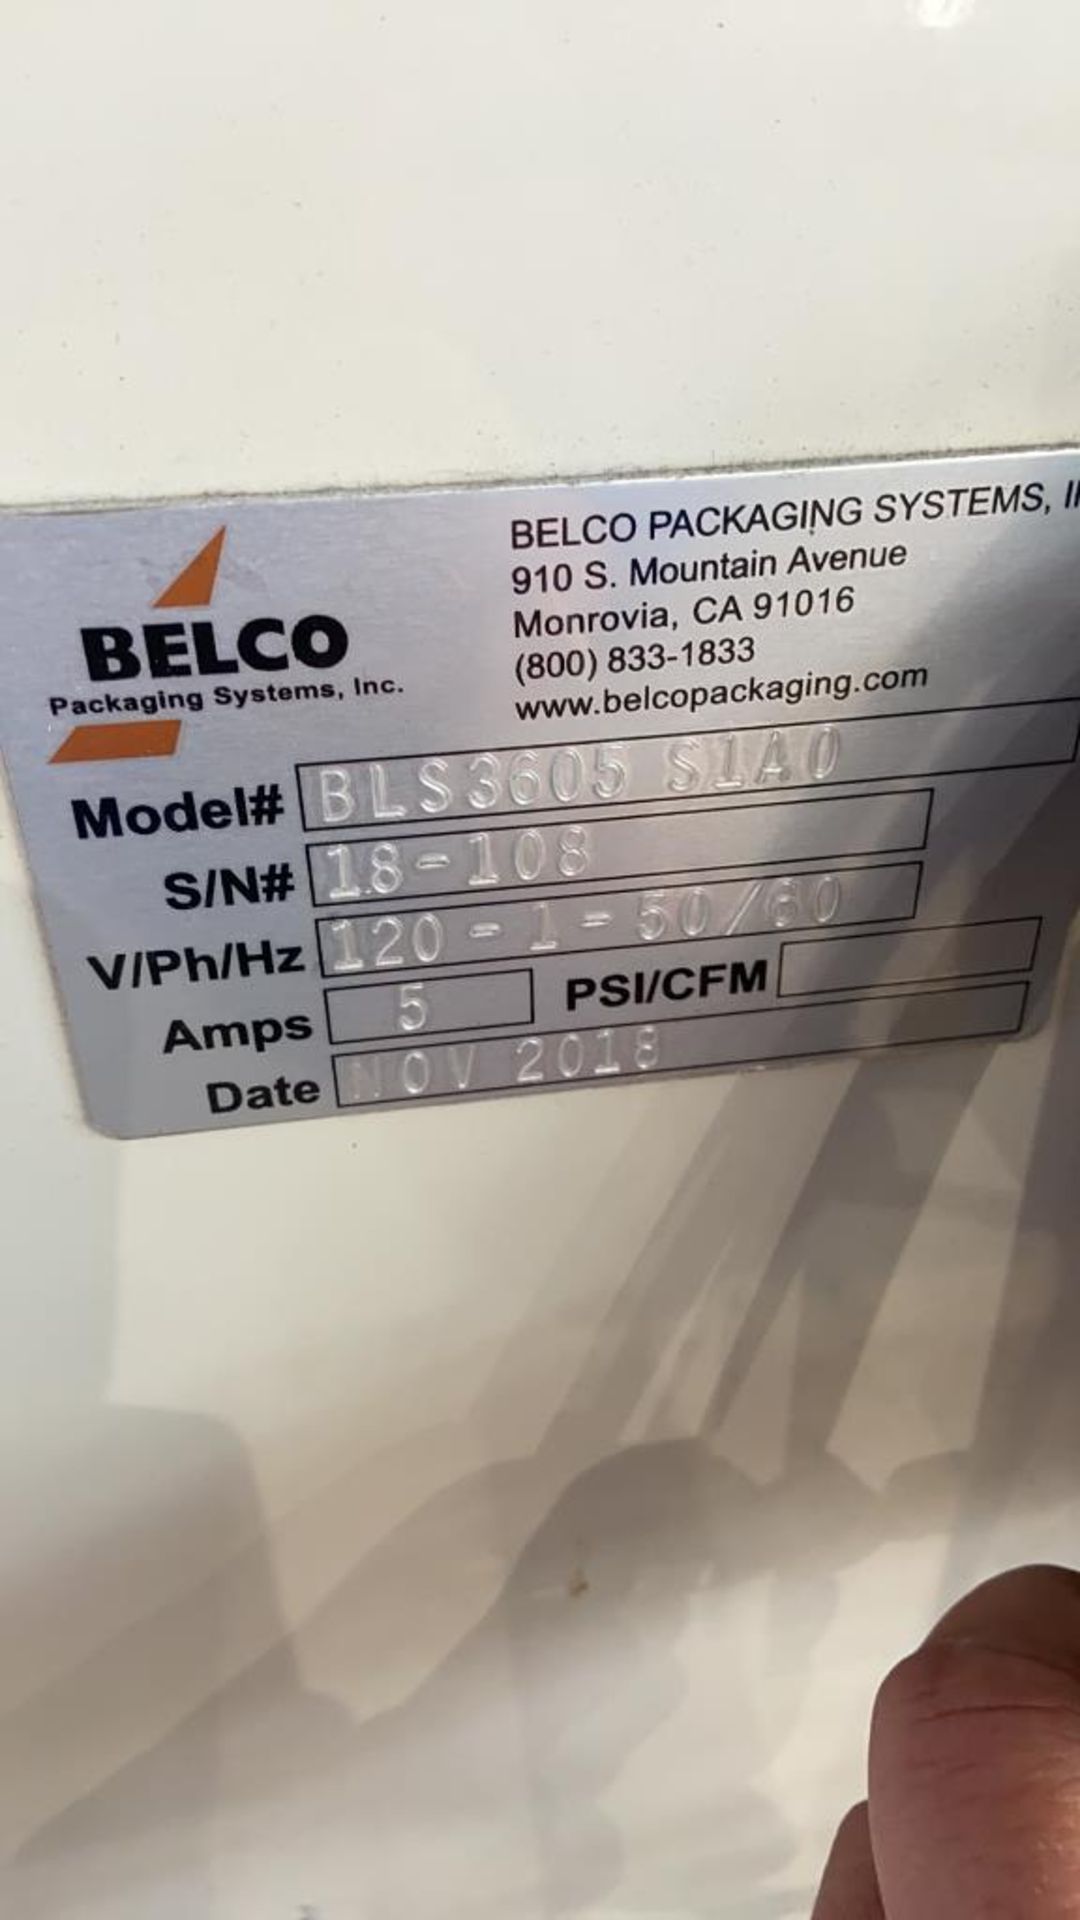 2018 Belco Packaging Systems Inc. 36" Dia.-Accumulation Table, M/N BLS3605 S1A0, S/N 18-108, 120 - Image 6 of 8